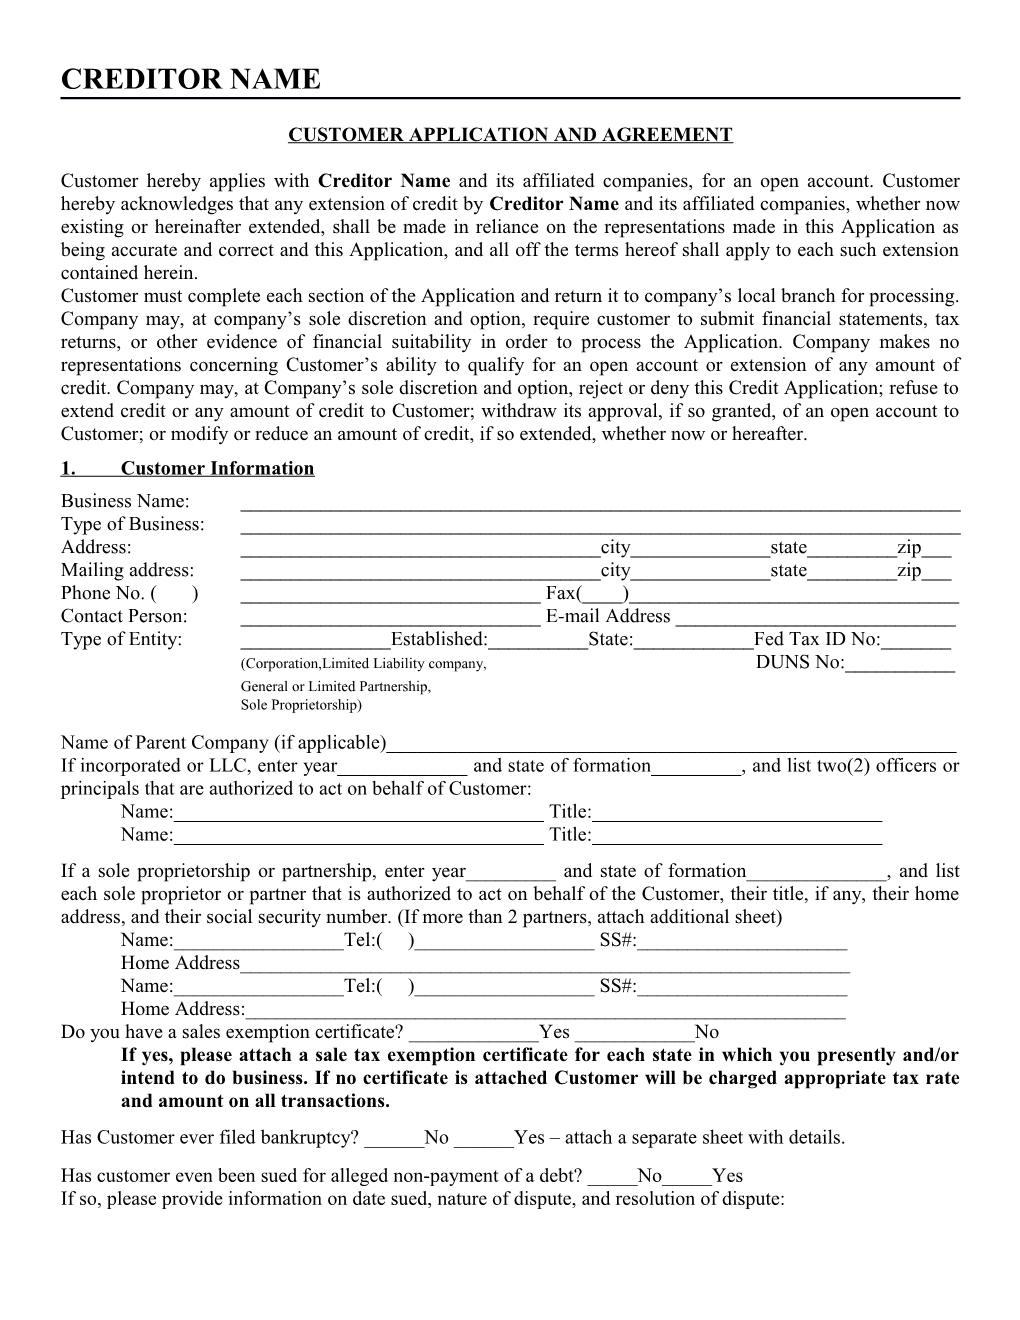 Customer Application and Agreement